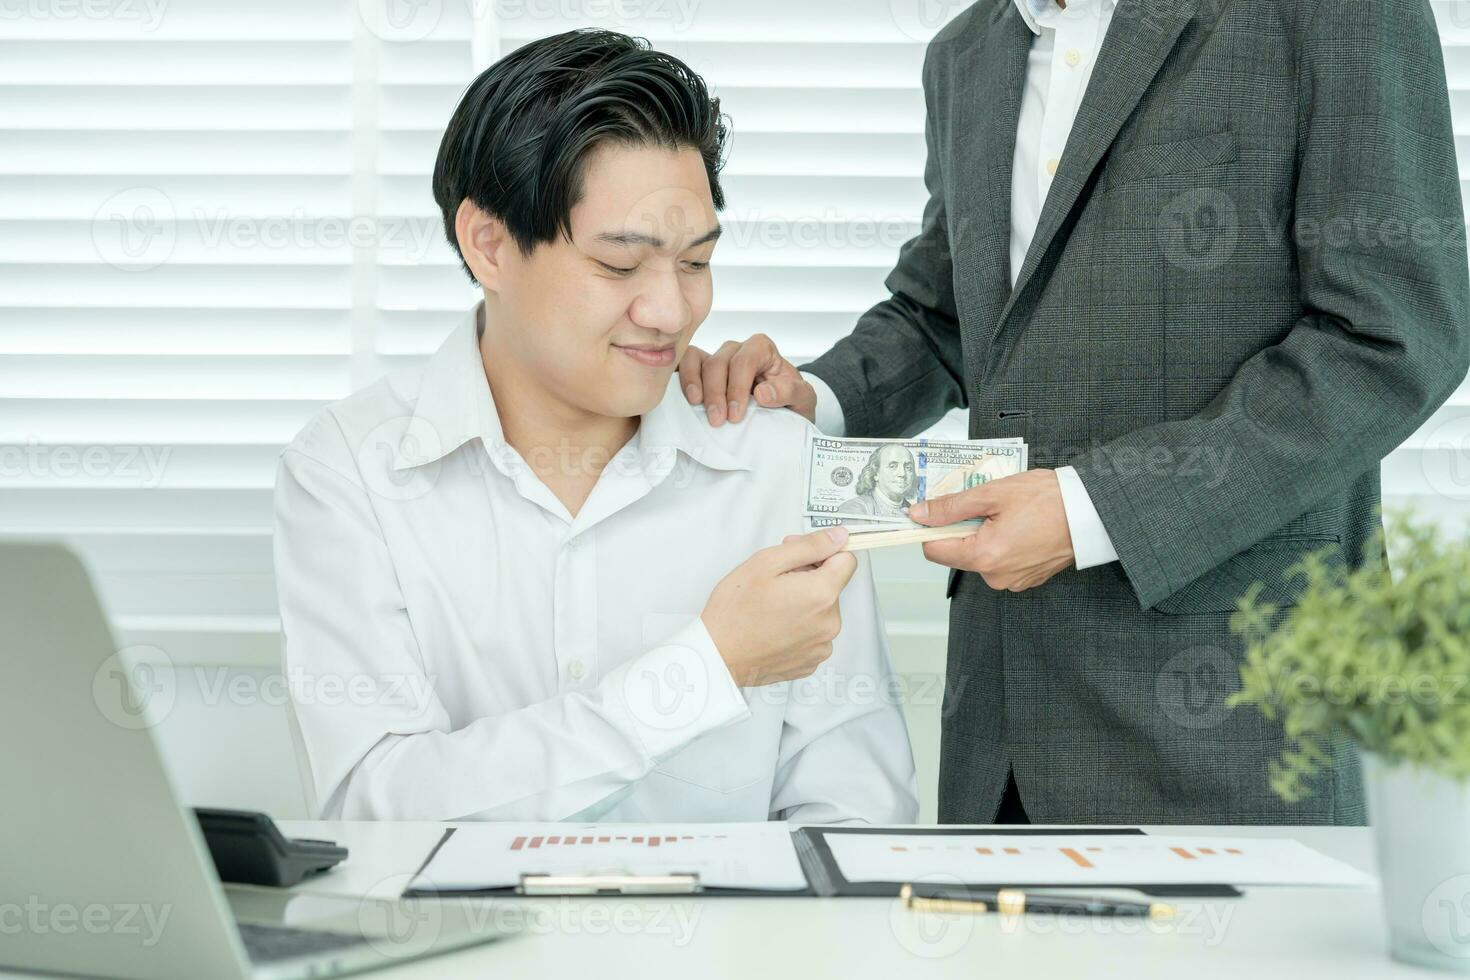 Businessmen receive salary or bonuses from management or Boss. Company give rewards to encourage work. Smiling businessman enjoying a reward at the desk in the office. photo